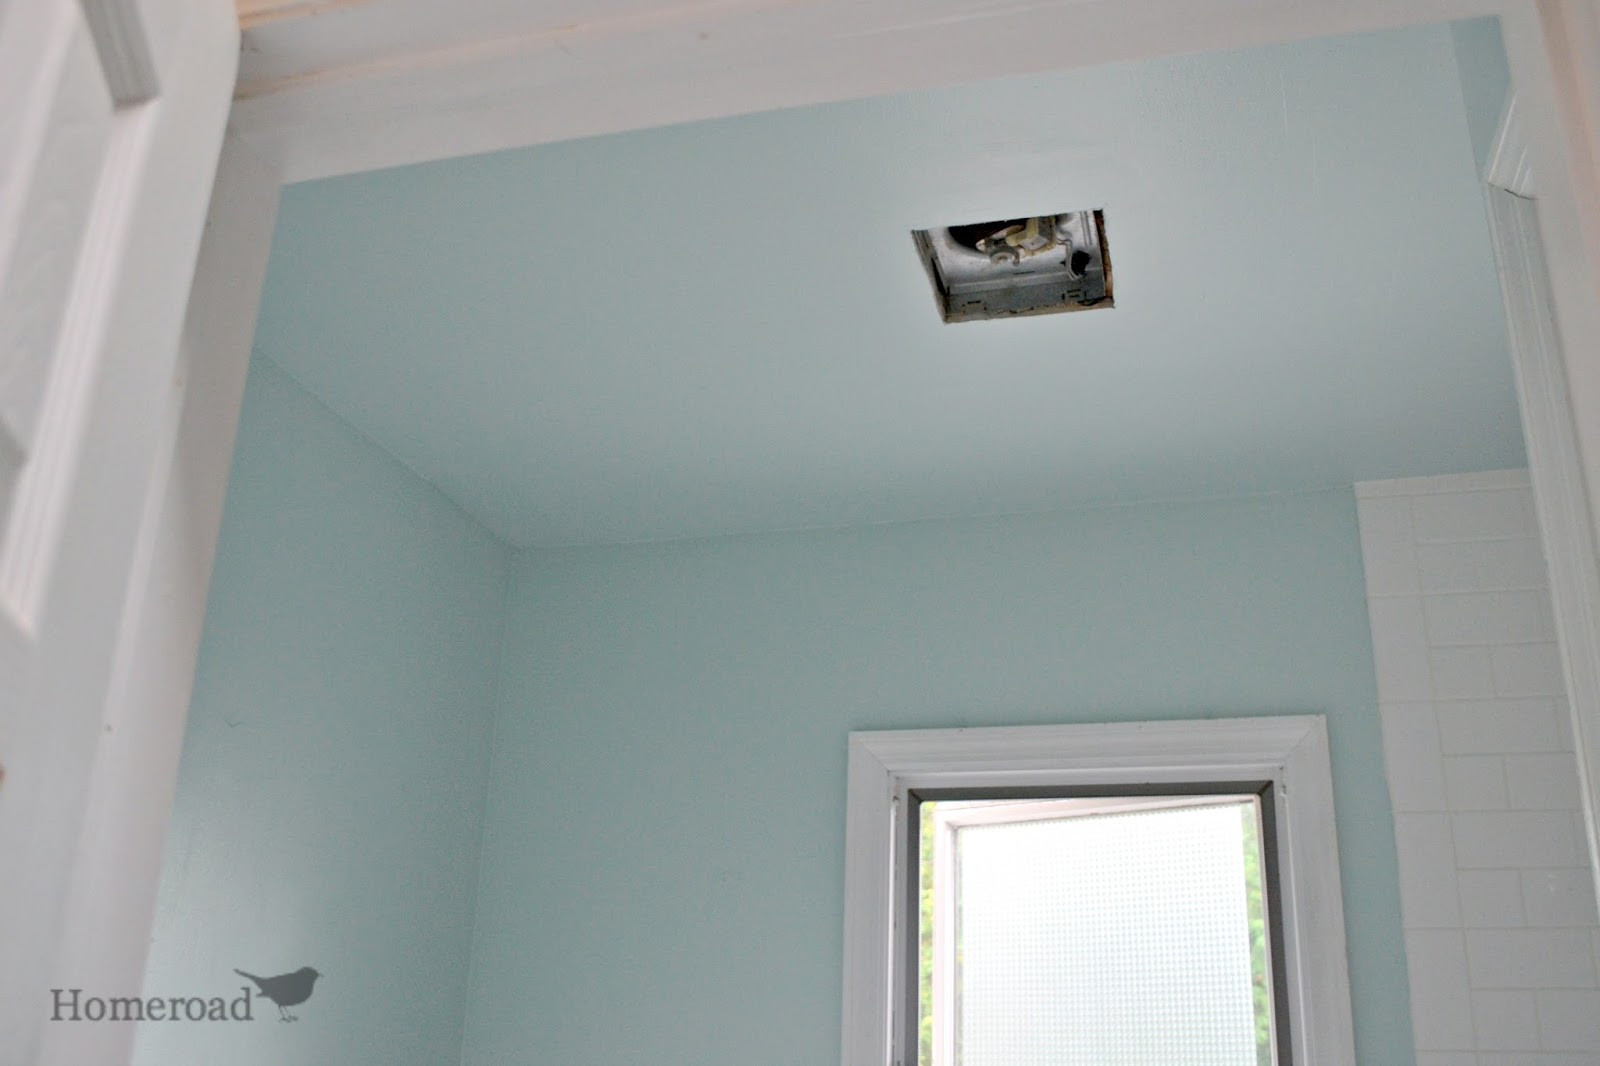 Best type of paint for bathroom ceiling